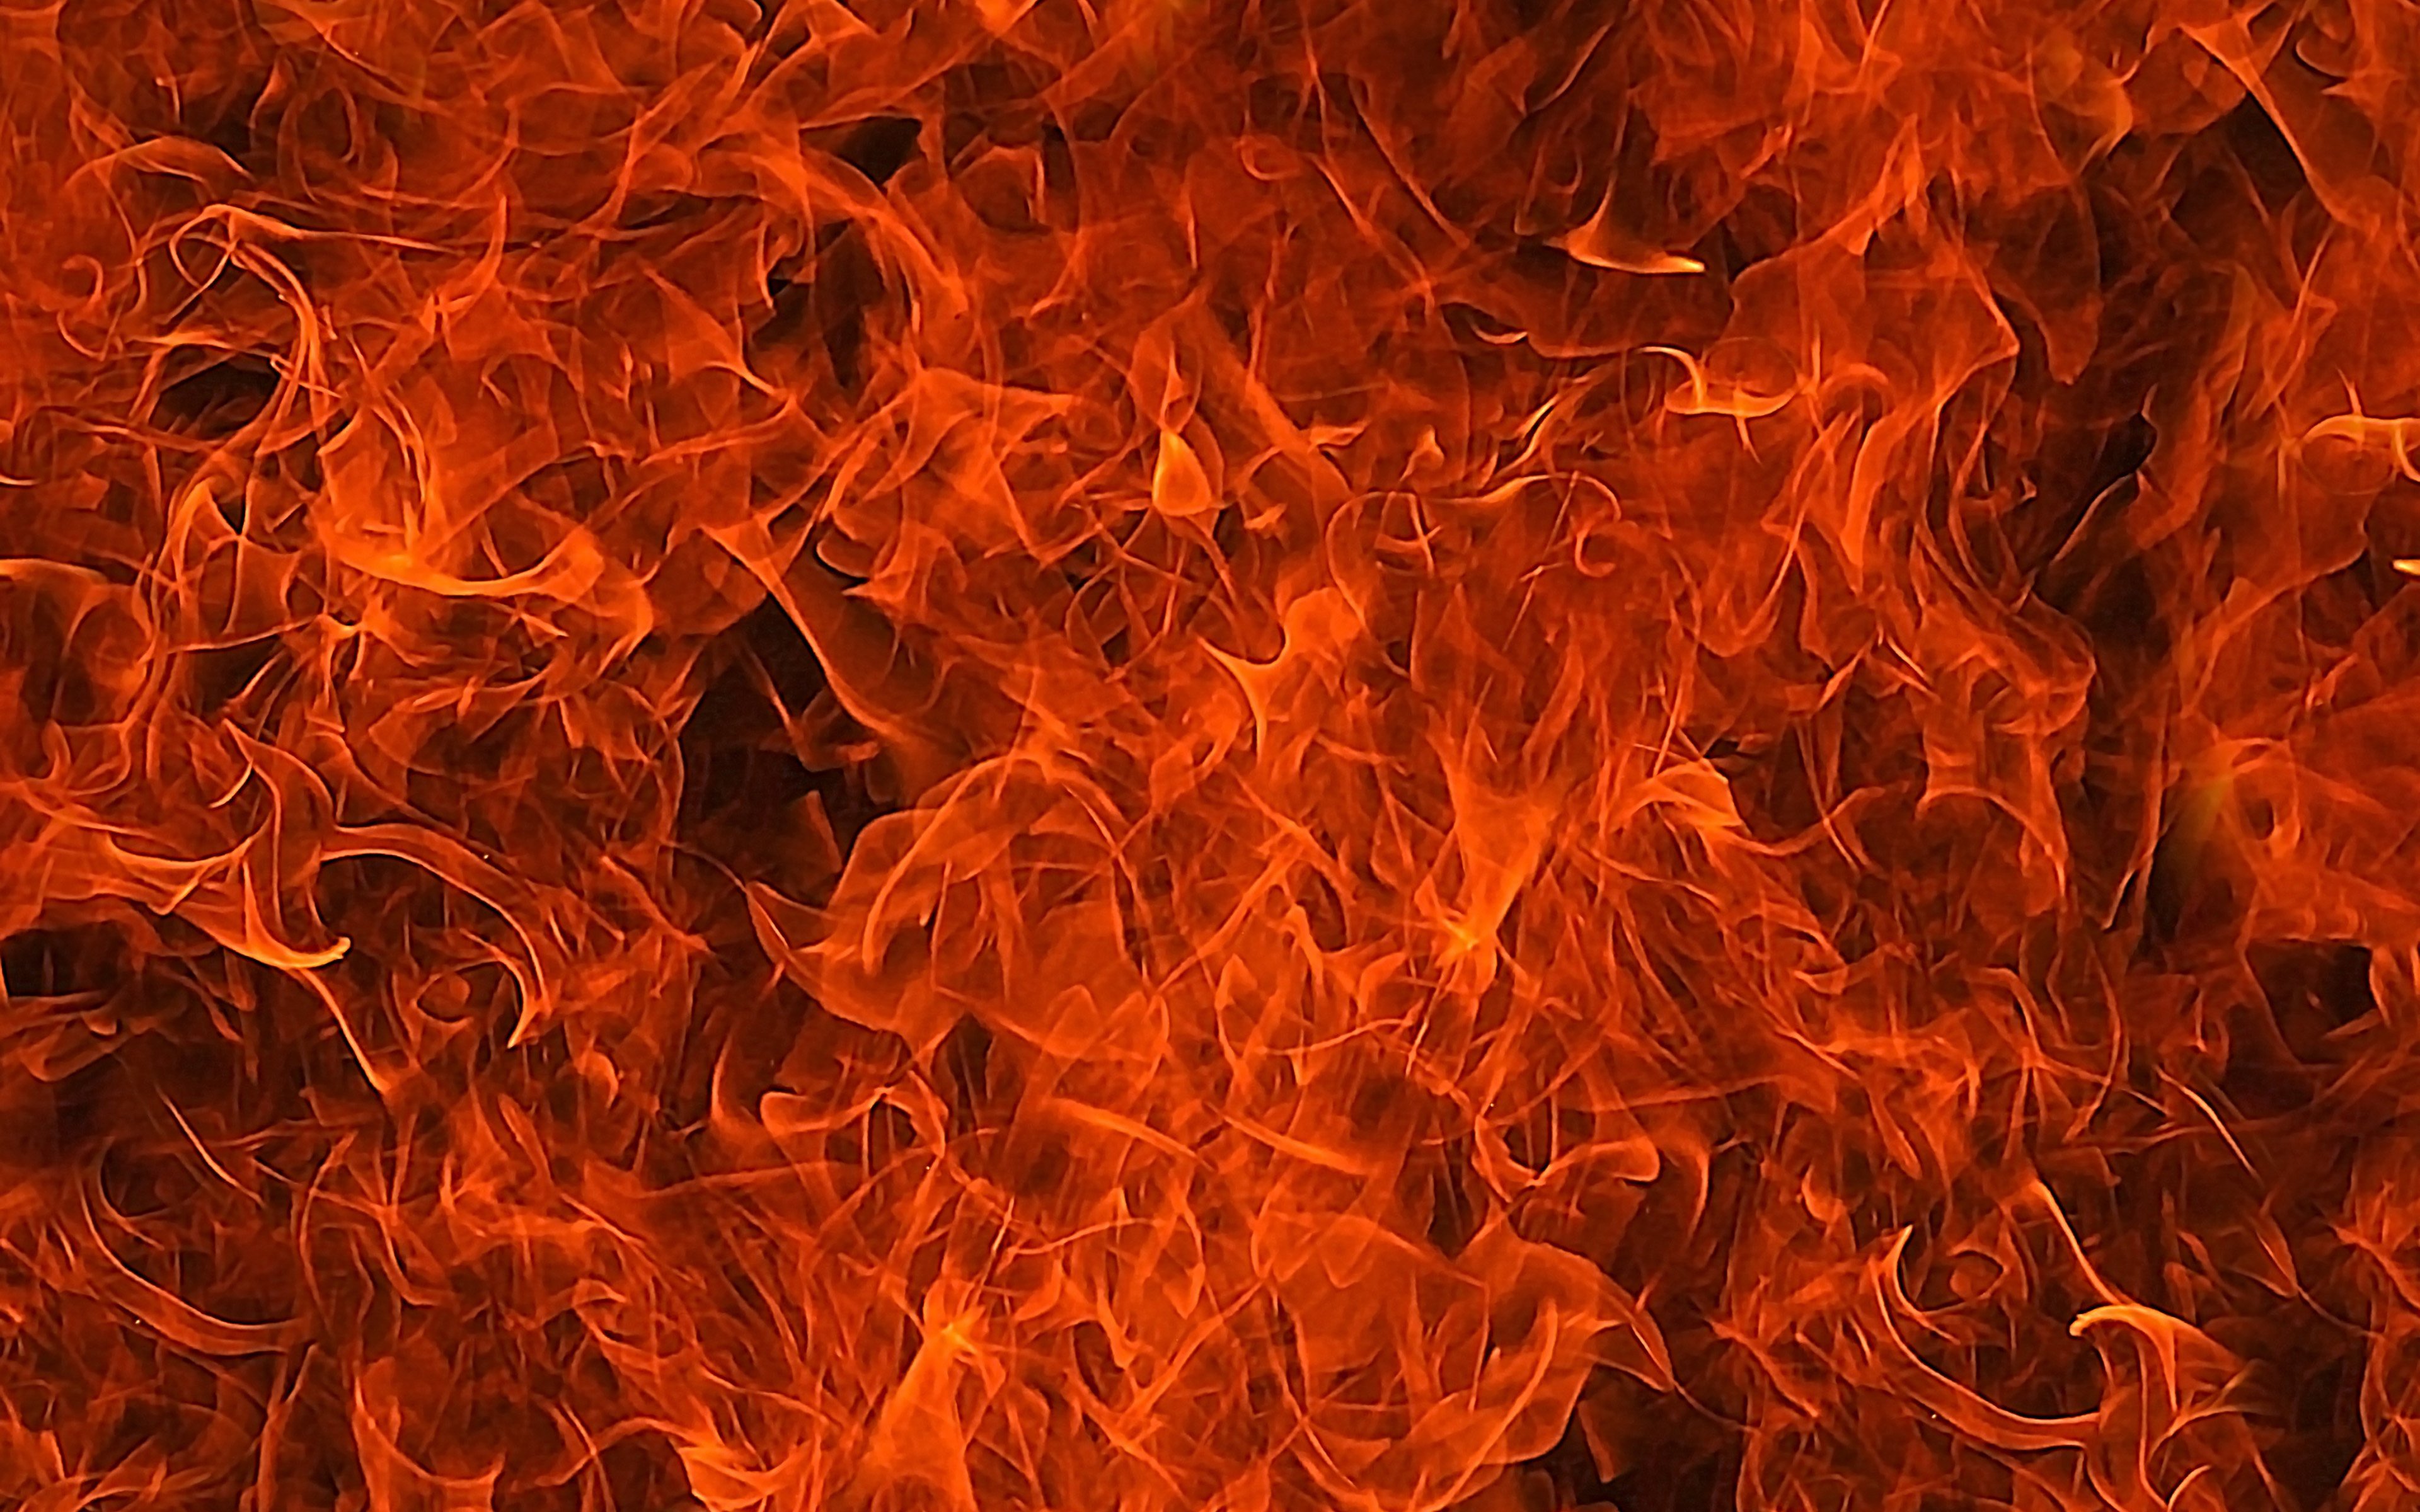 Details Fire Background Images Hd Abzlocal Mx Vrogue Co